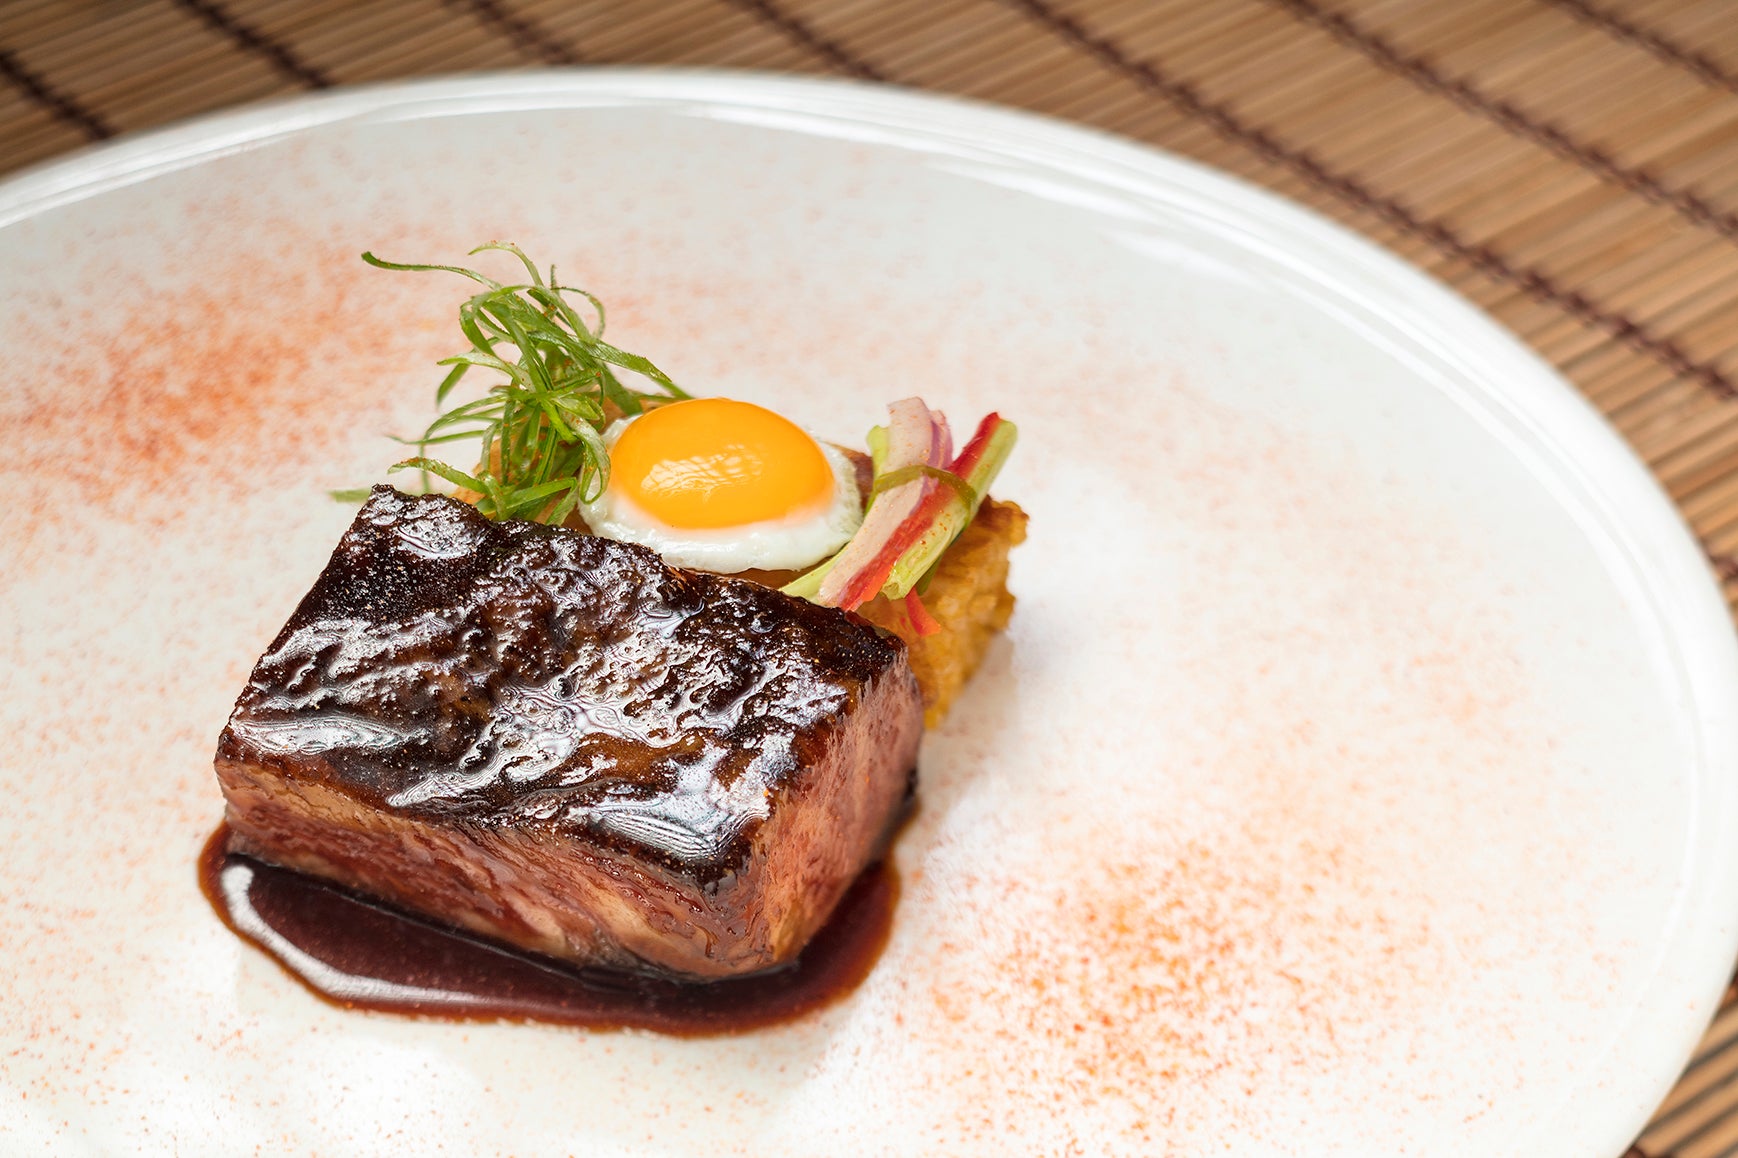 Aji’s short ribs are slow-cooked for 50 hours